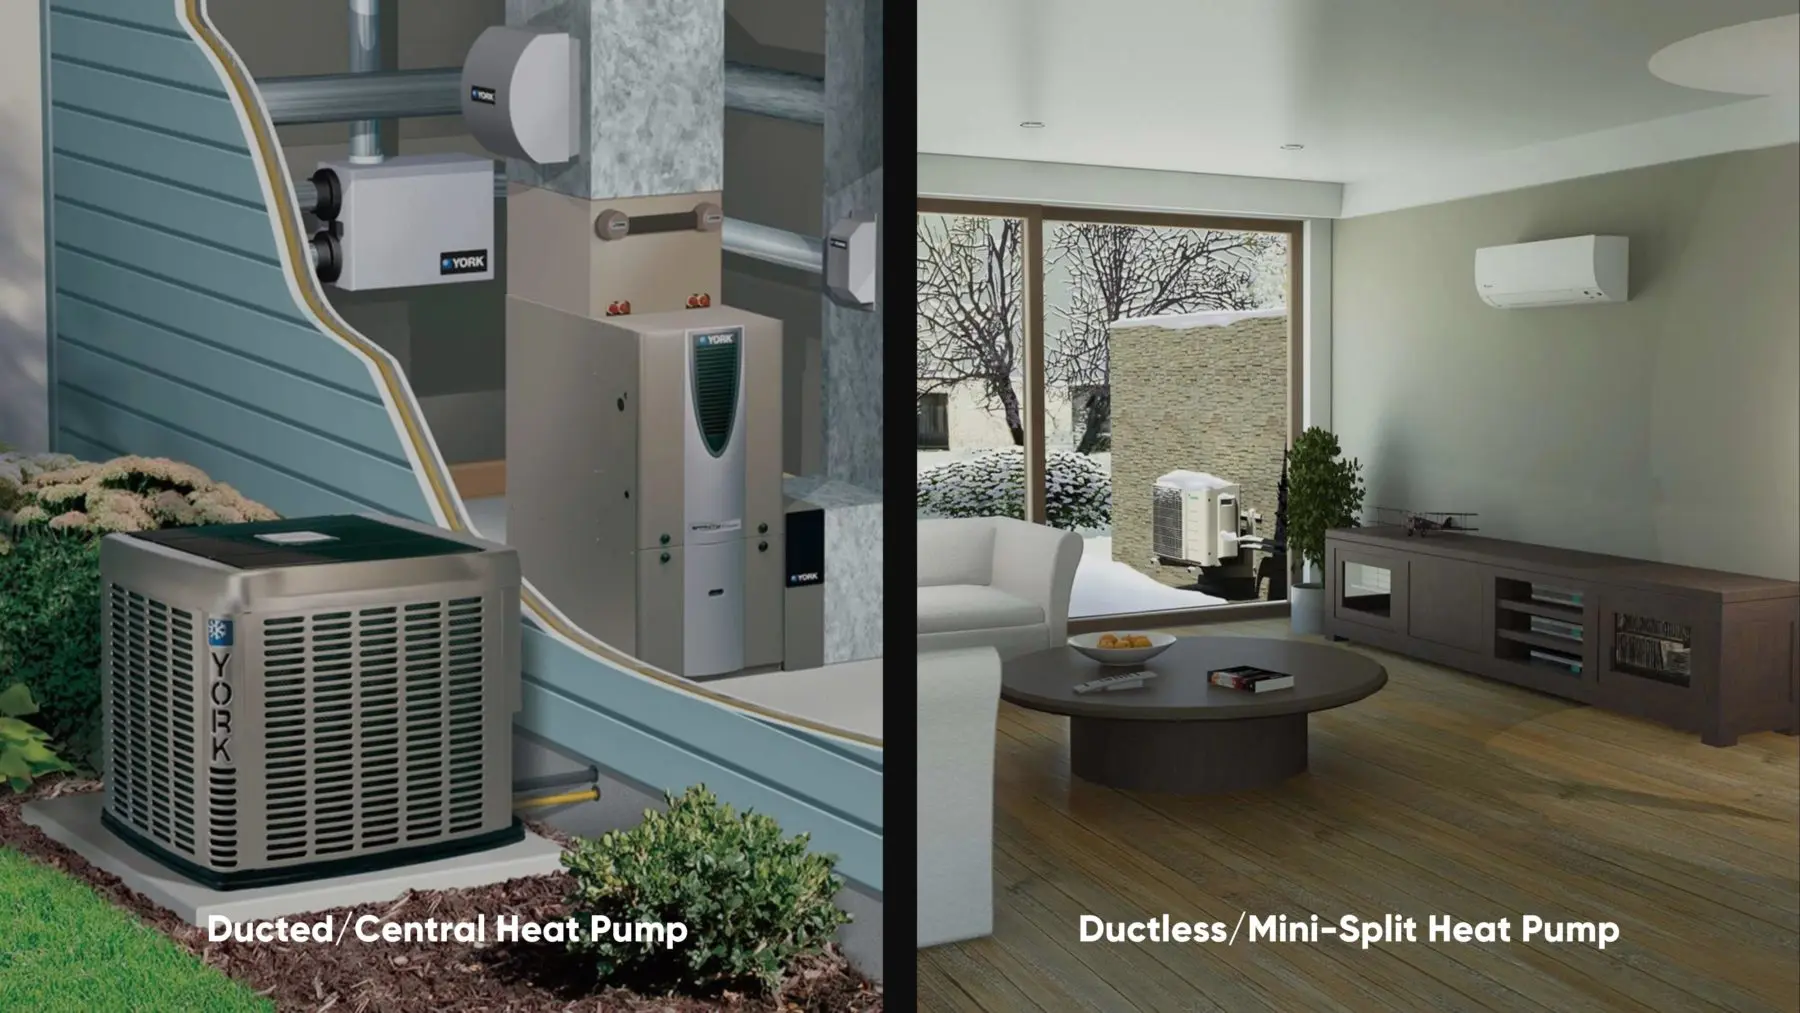 Two pictures side-by-side: the outdoor condenser of a whole-house heat pump and a cutaway showing the ducted heat distribution unit indoors, and then a ductless heat pump in a living area, showing the small outdoor condenser in the snowy outdoors.